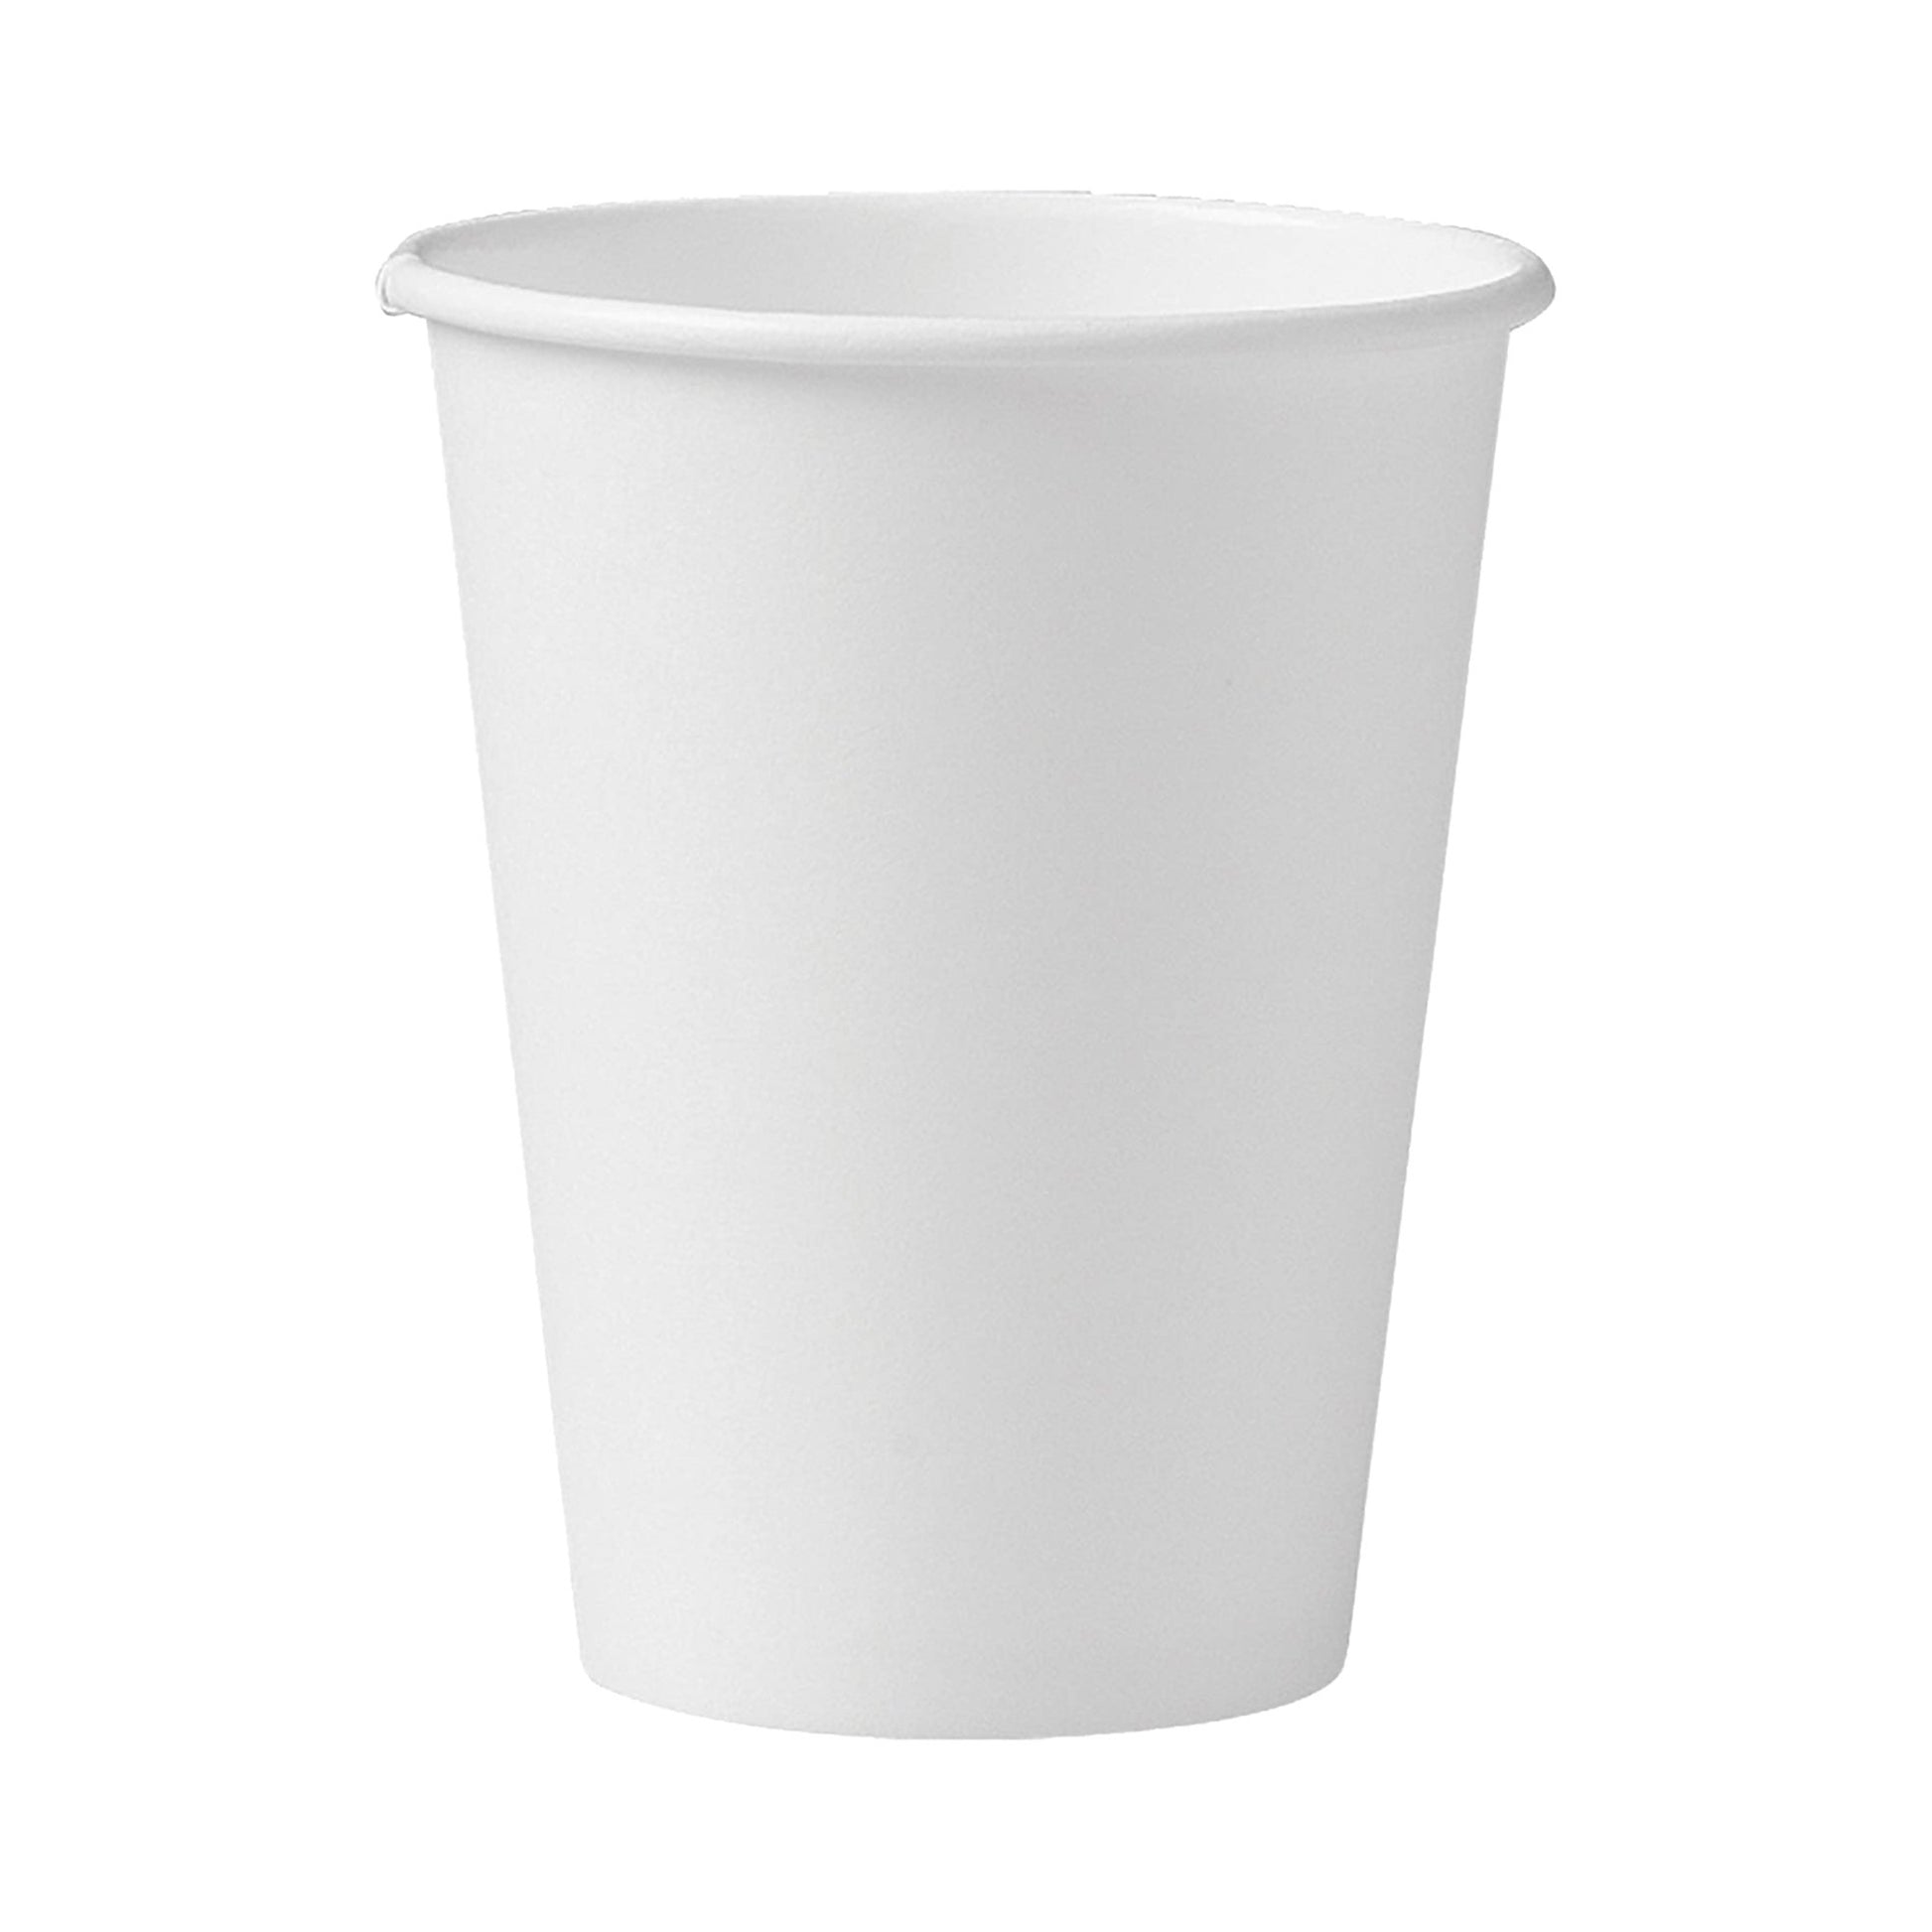 Solo® Paper Drinking Cup, 12-Ounce Capacity, Sold As 1000/Case Rj 412Wn-2050